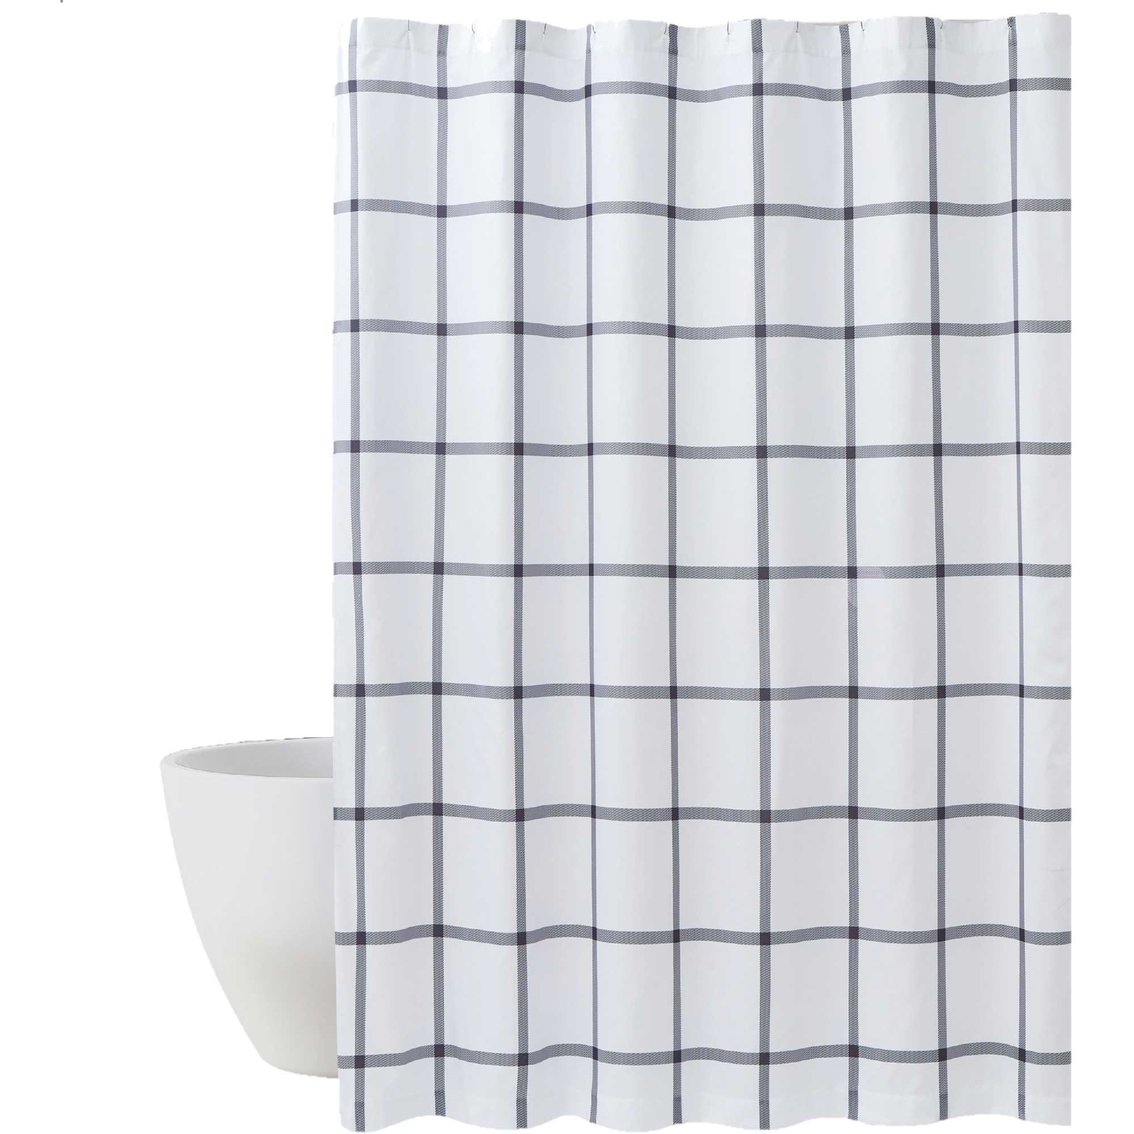 Truly Soft Printed Windowpane  72 x 72 in. Shower Curtain - Image 2 of 3